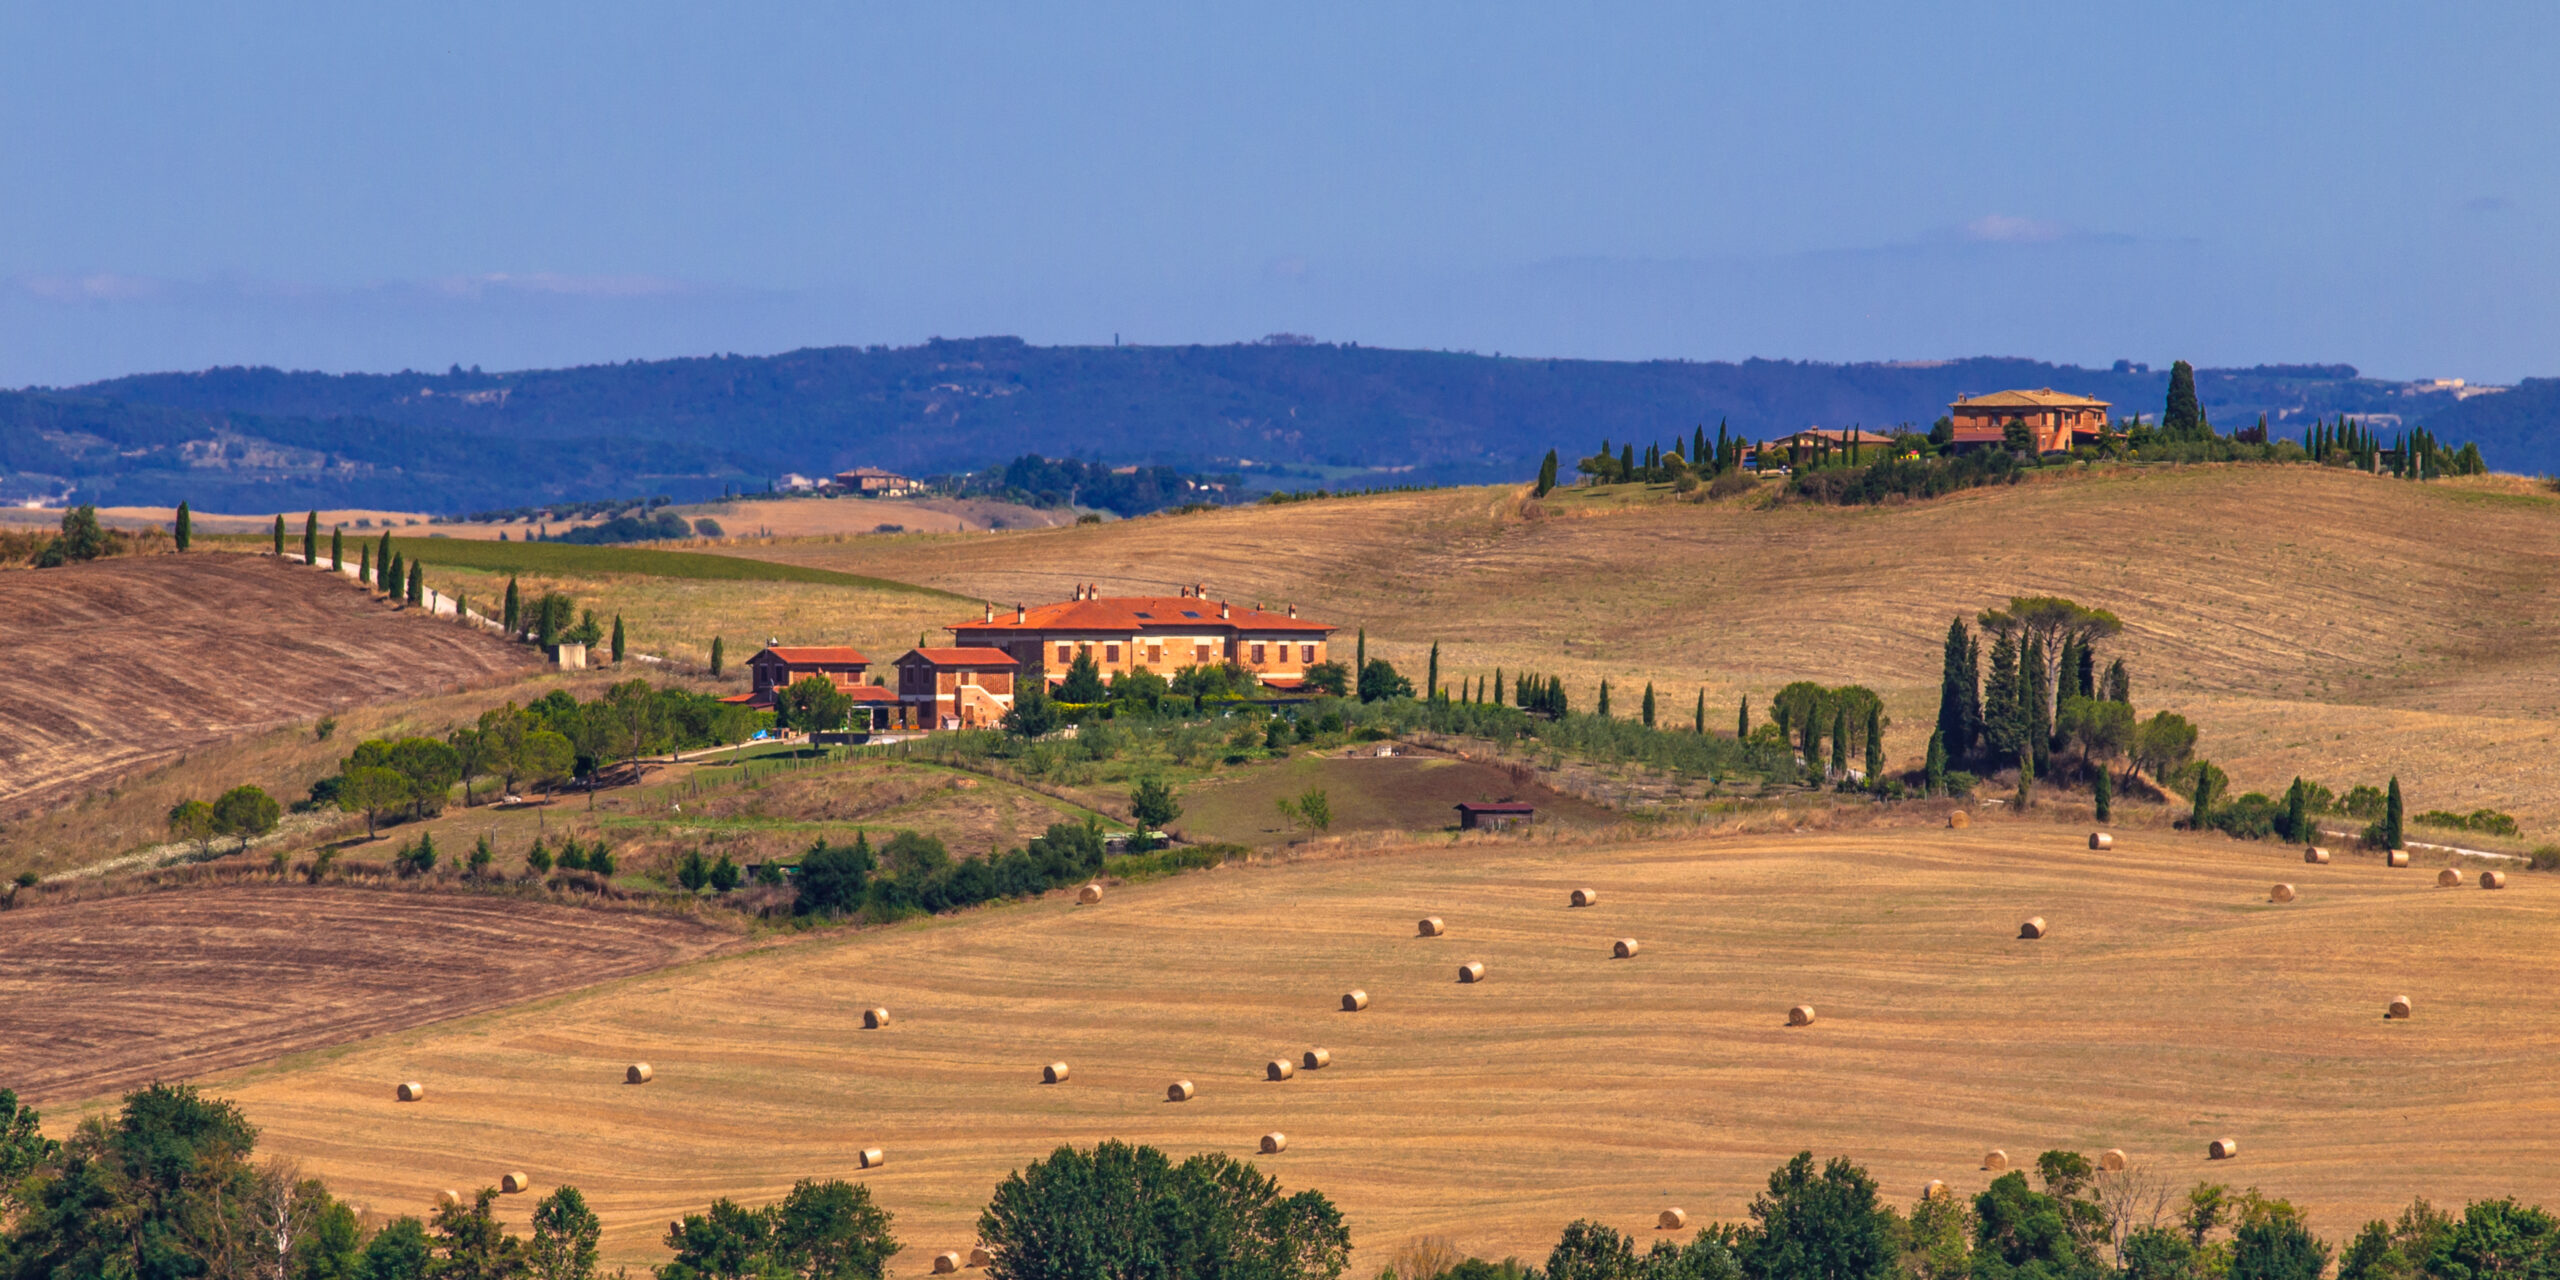 Tuscany Hilly Landscape with Farms and Villas